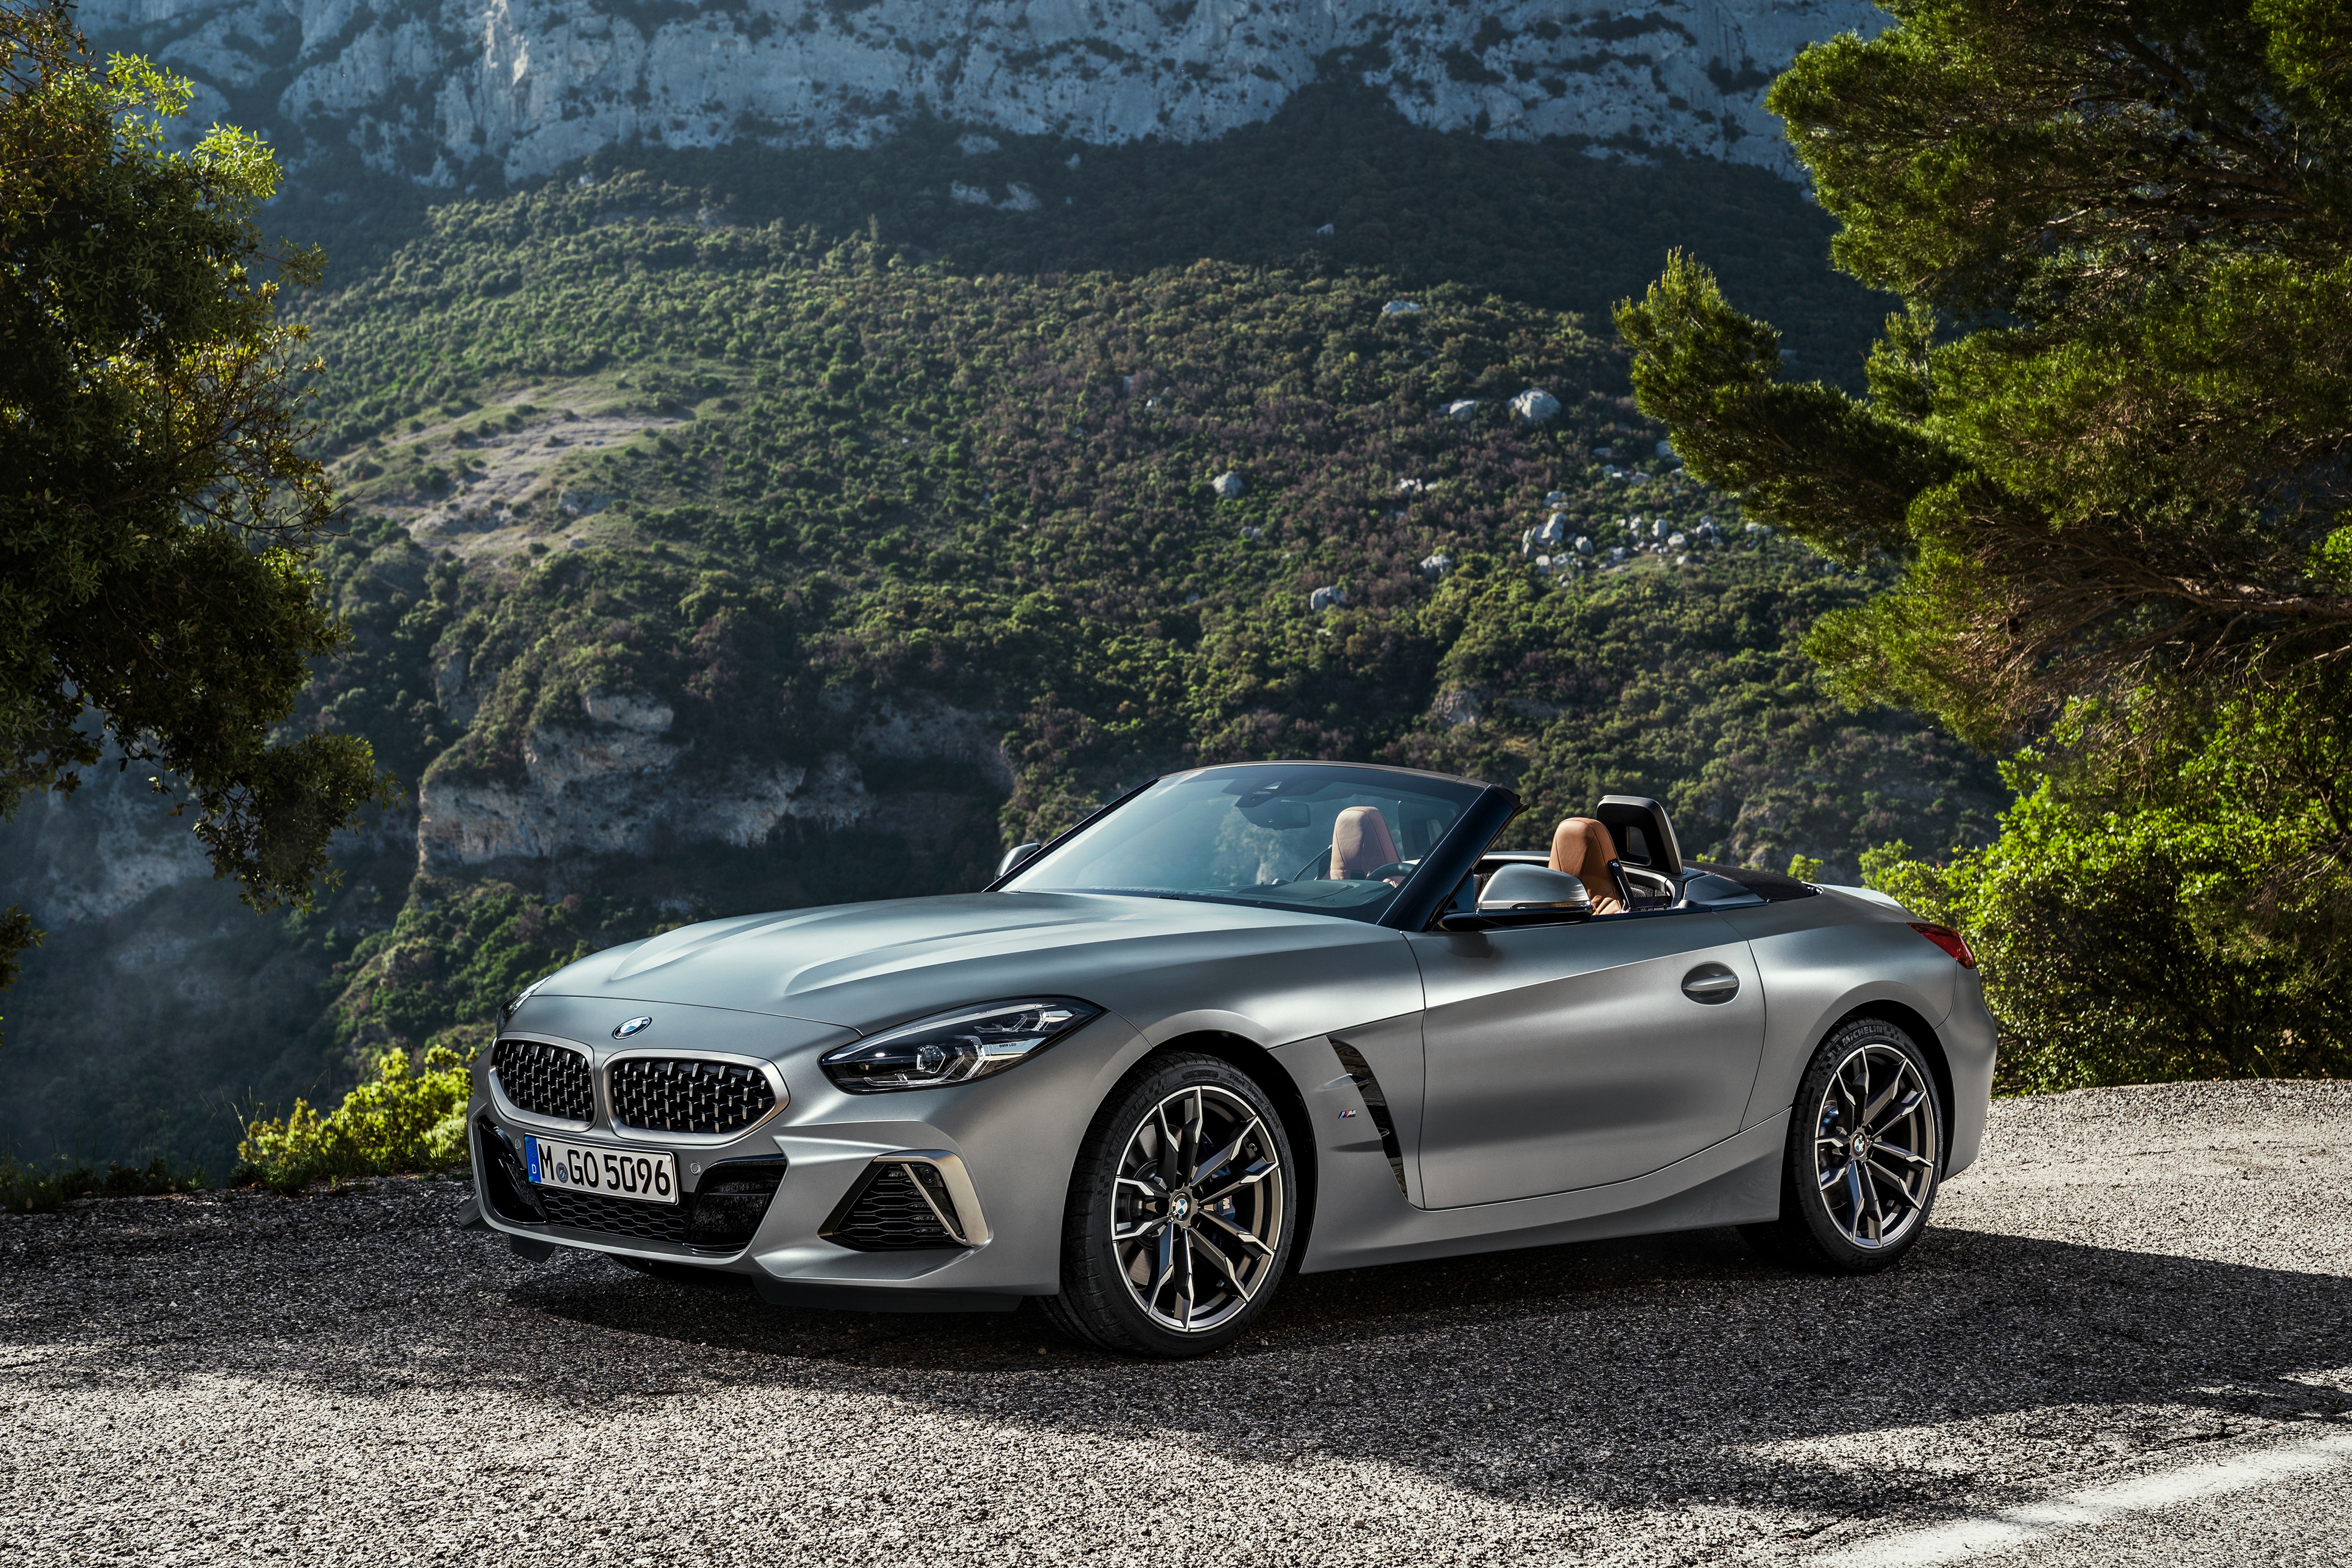 bmw z4, vehicles, bmw, cabriolet, car, silver car lock screen backgrounds